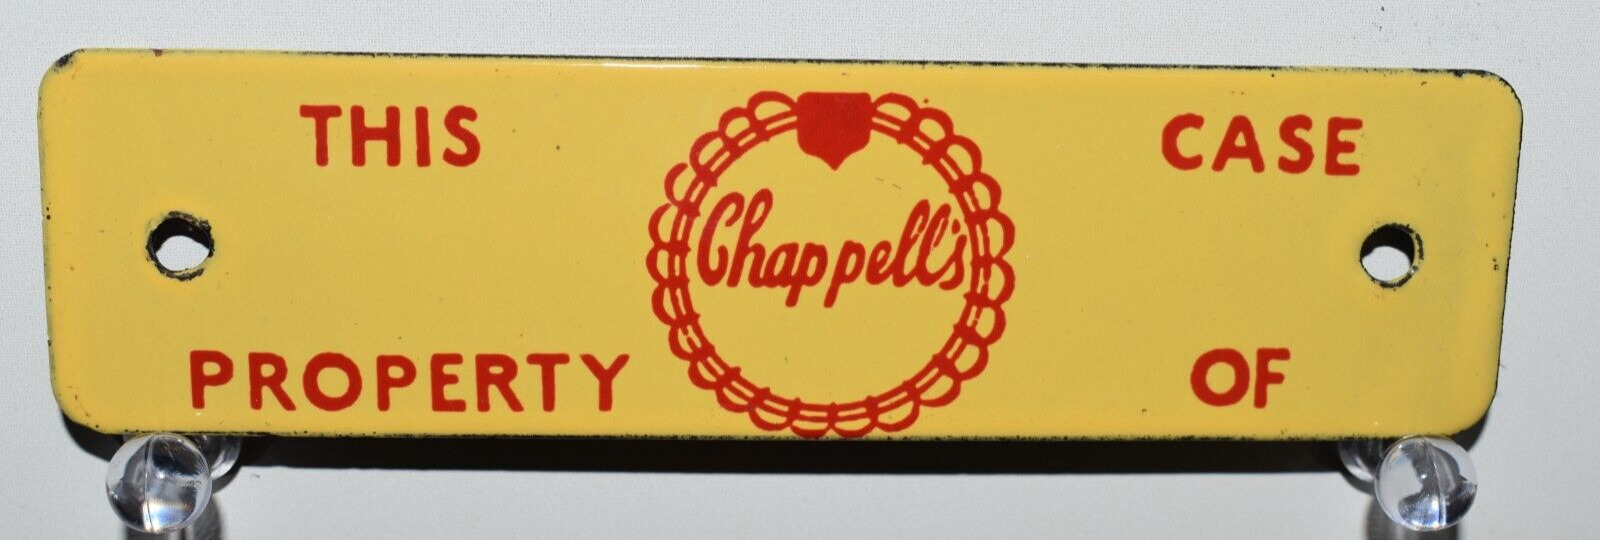 1950 Era Chappell’s Dairy Milk Farm Crate Porcelain Sign Tag Kentucky